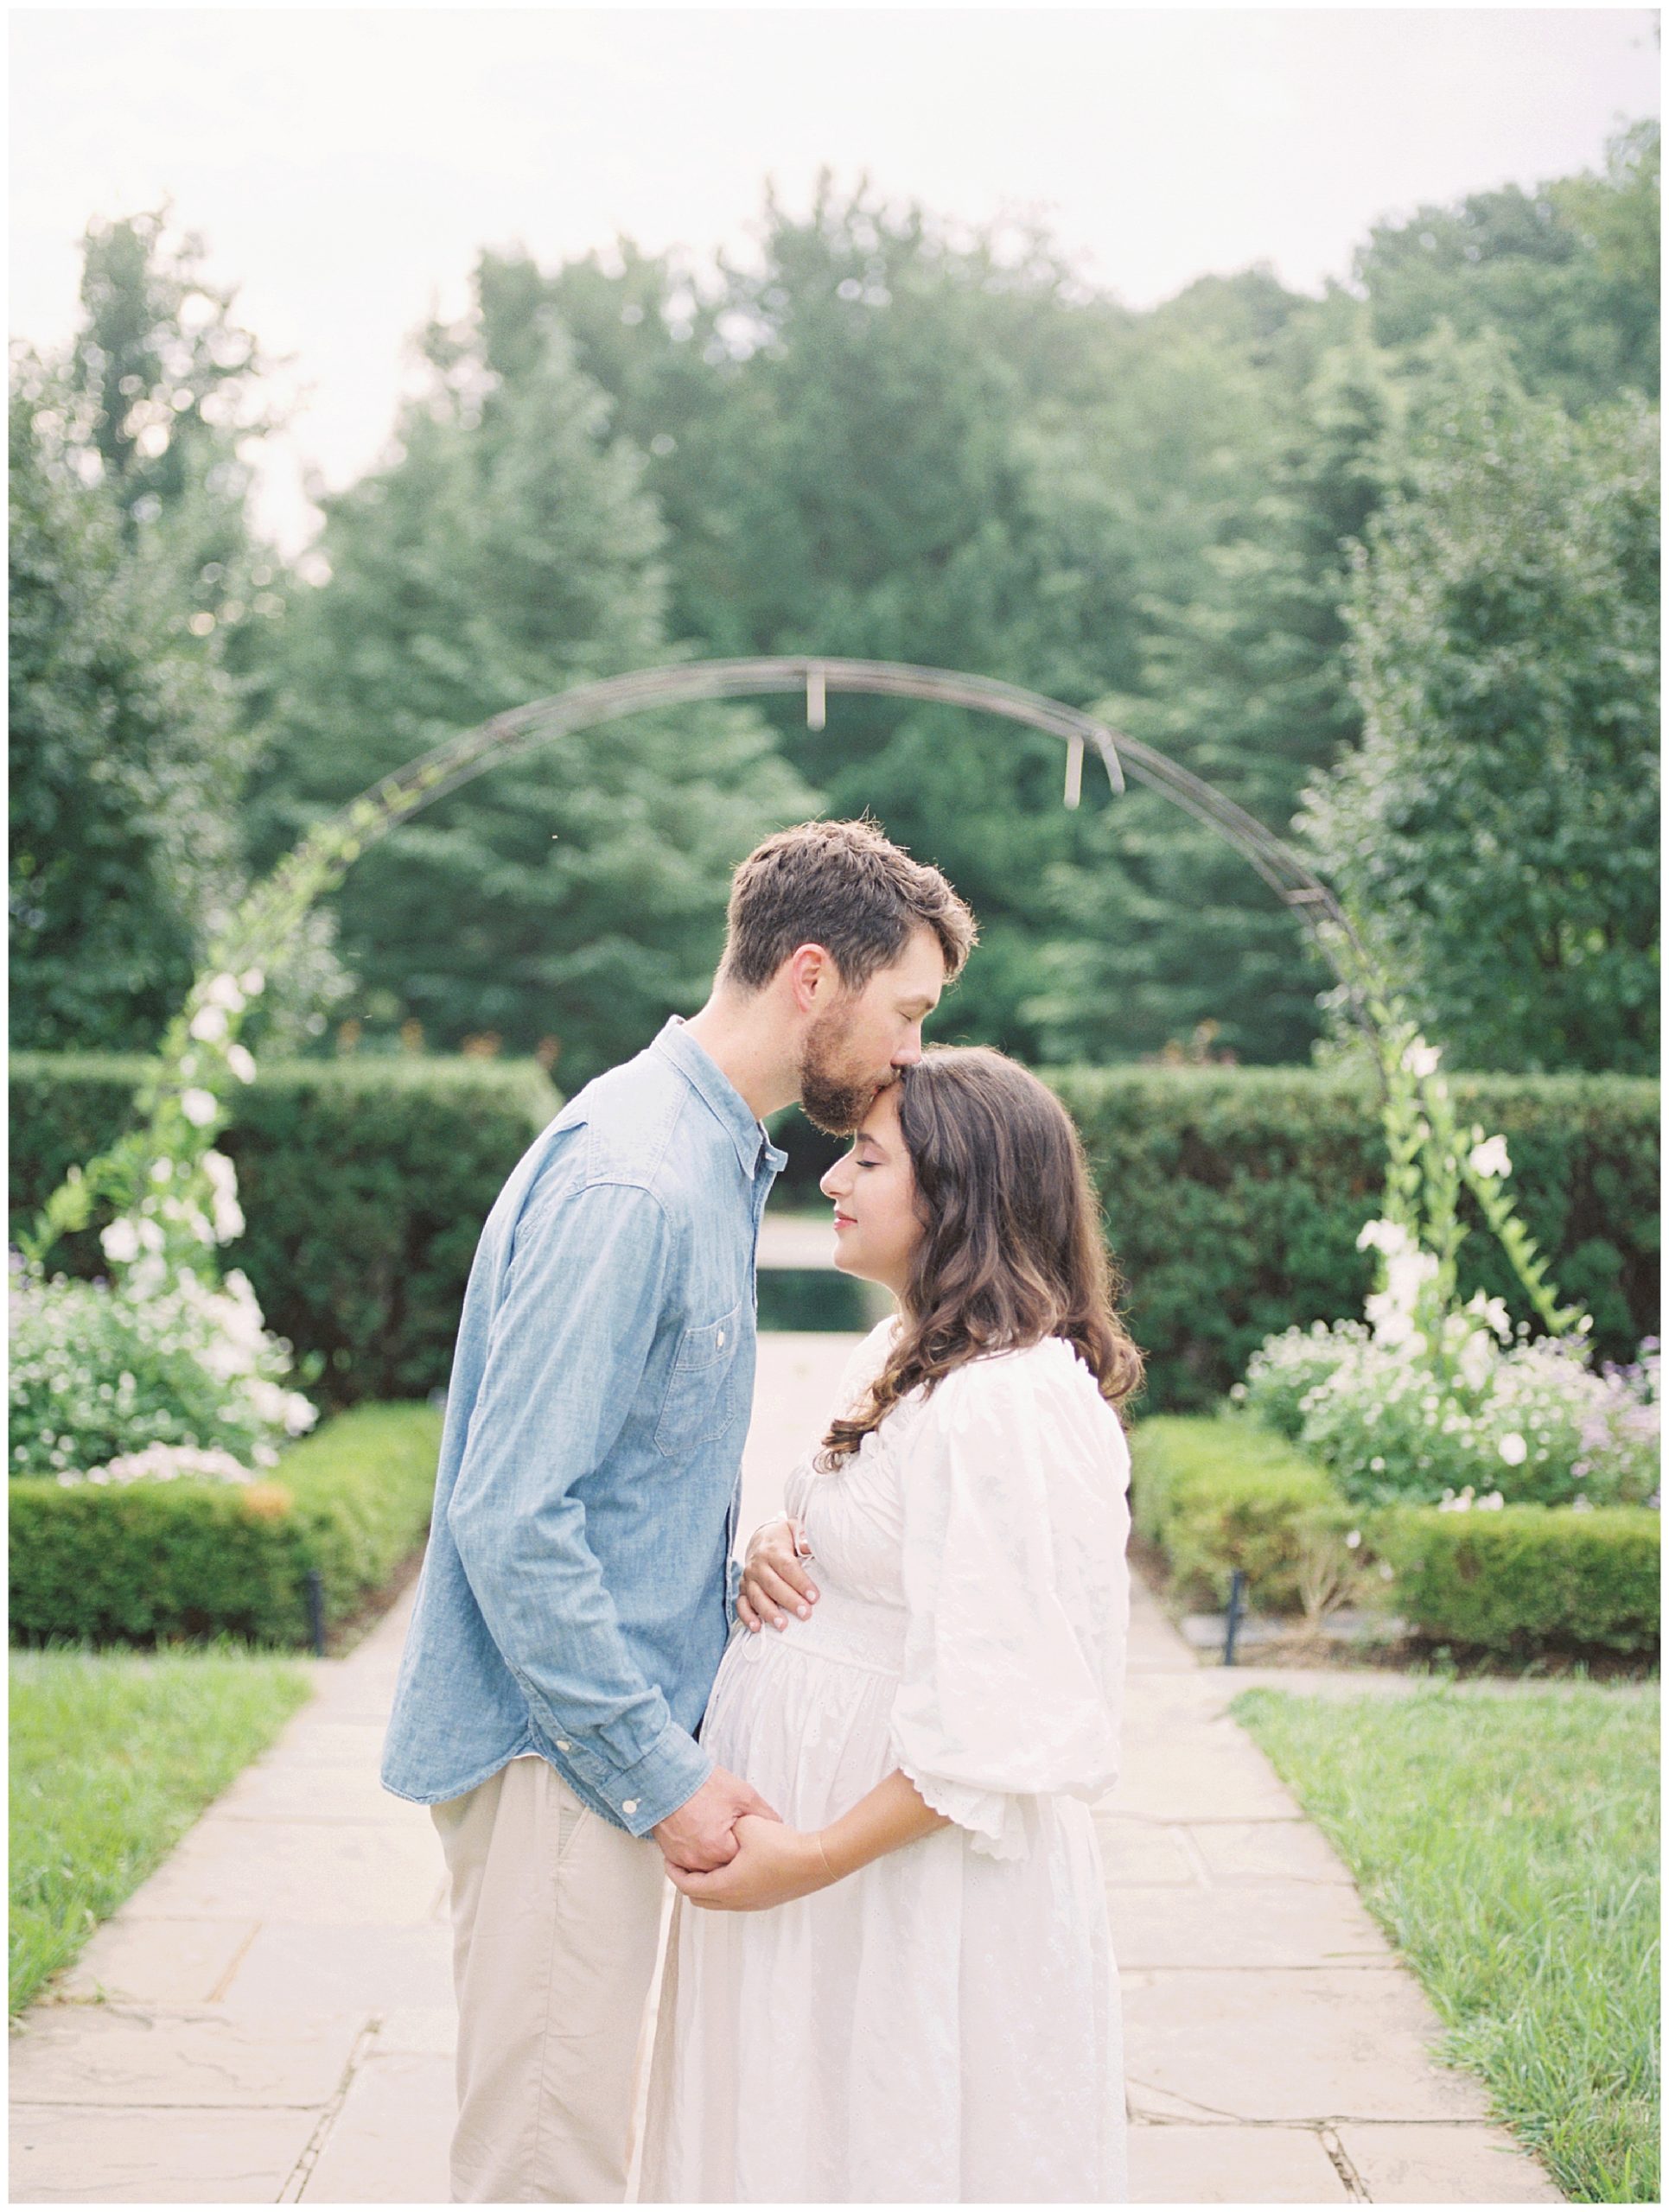 Expecting father kisses the top of his wife's head as they stand by a floral arch during their garden maternity session.